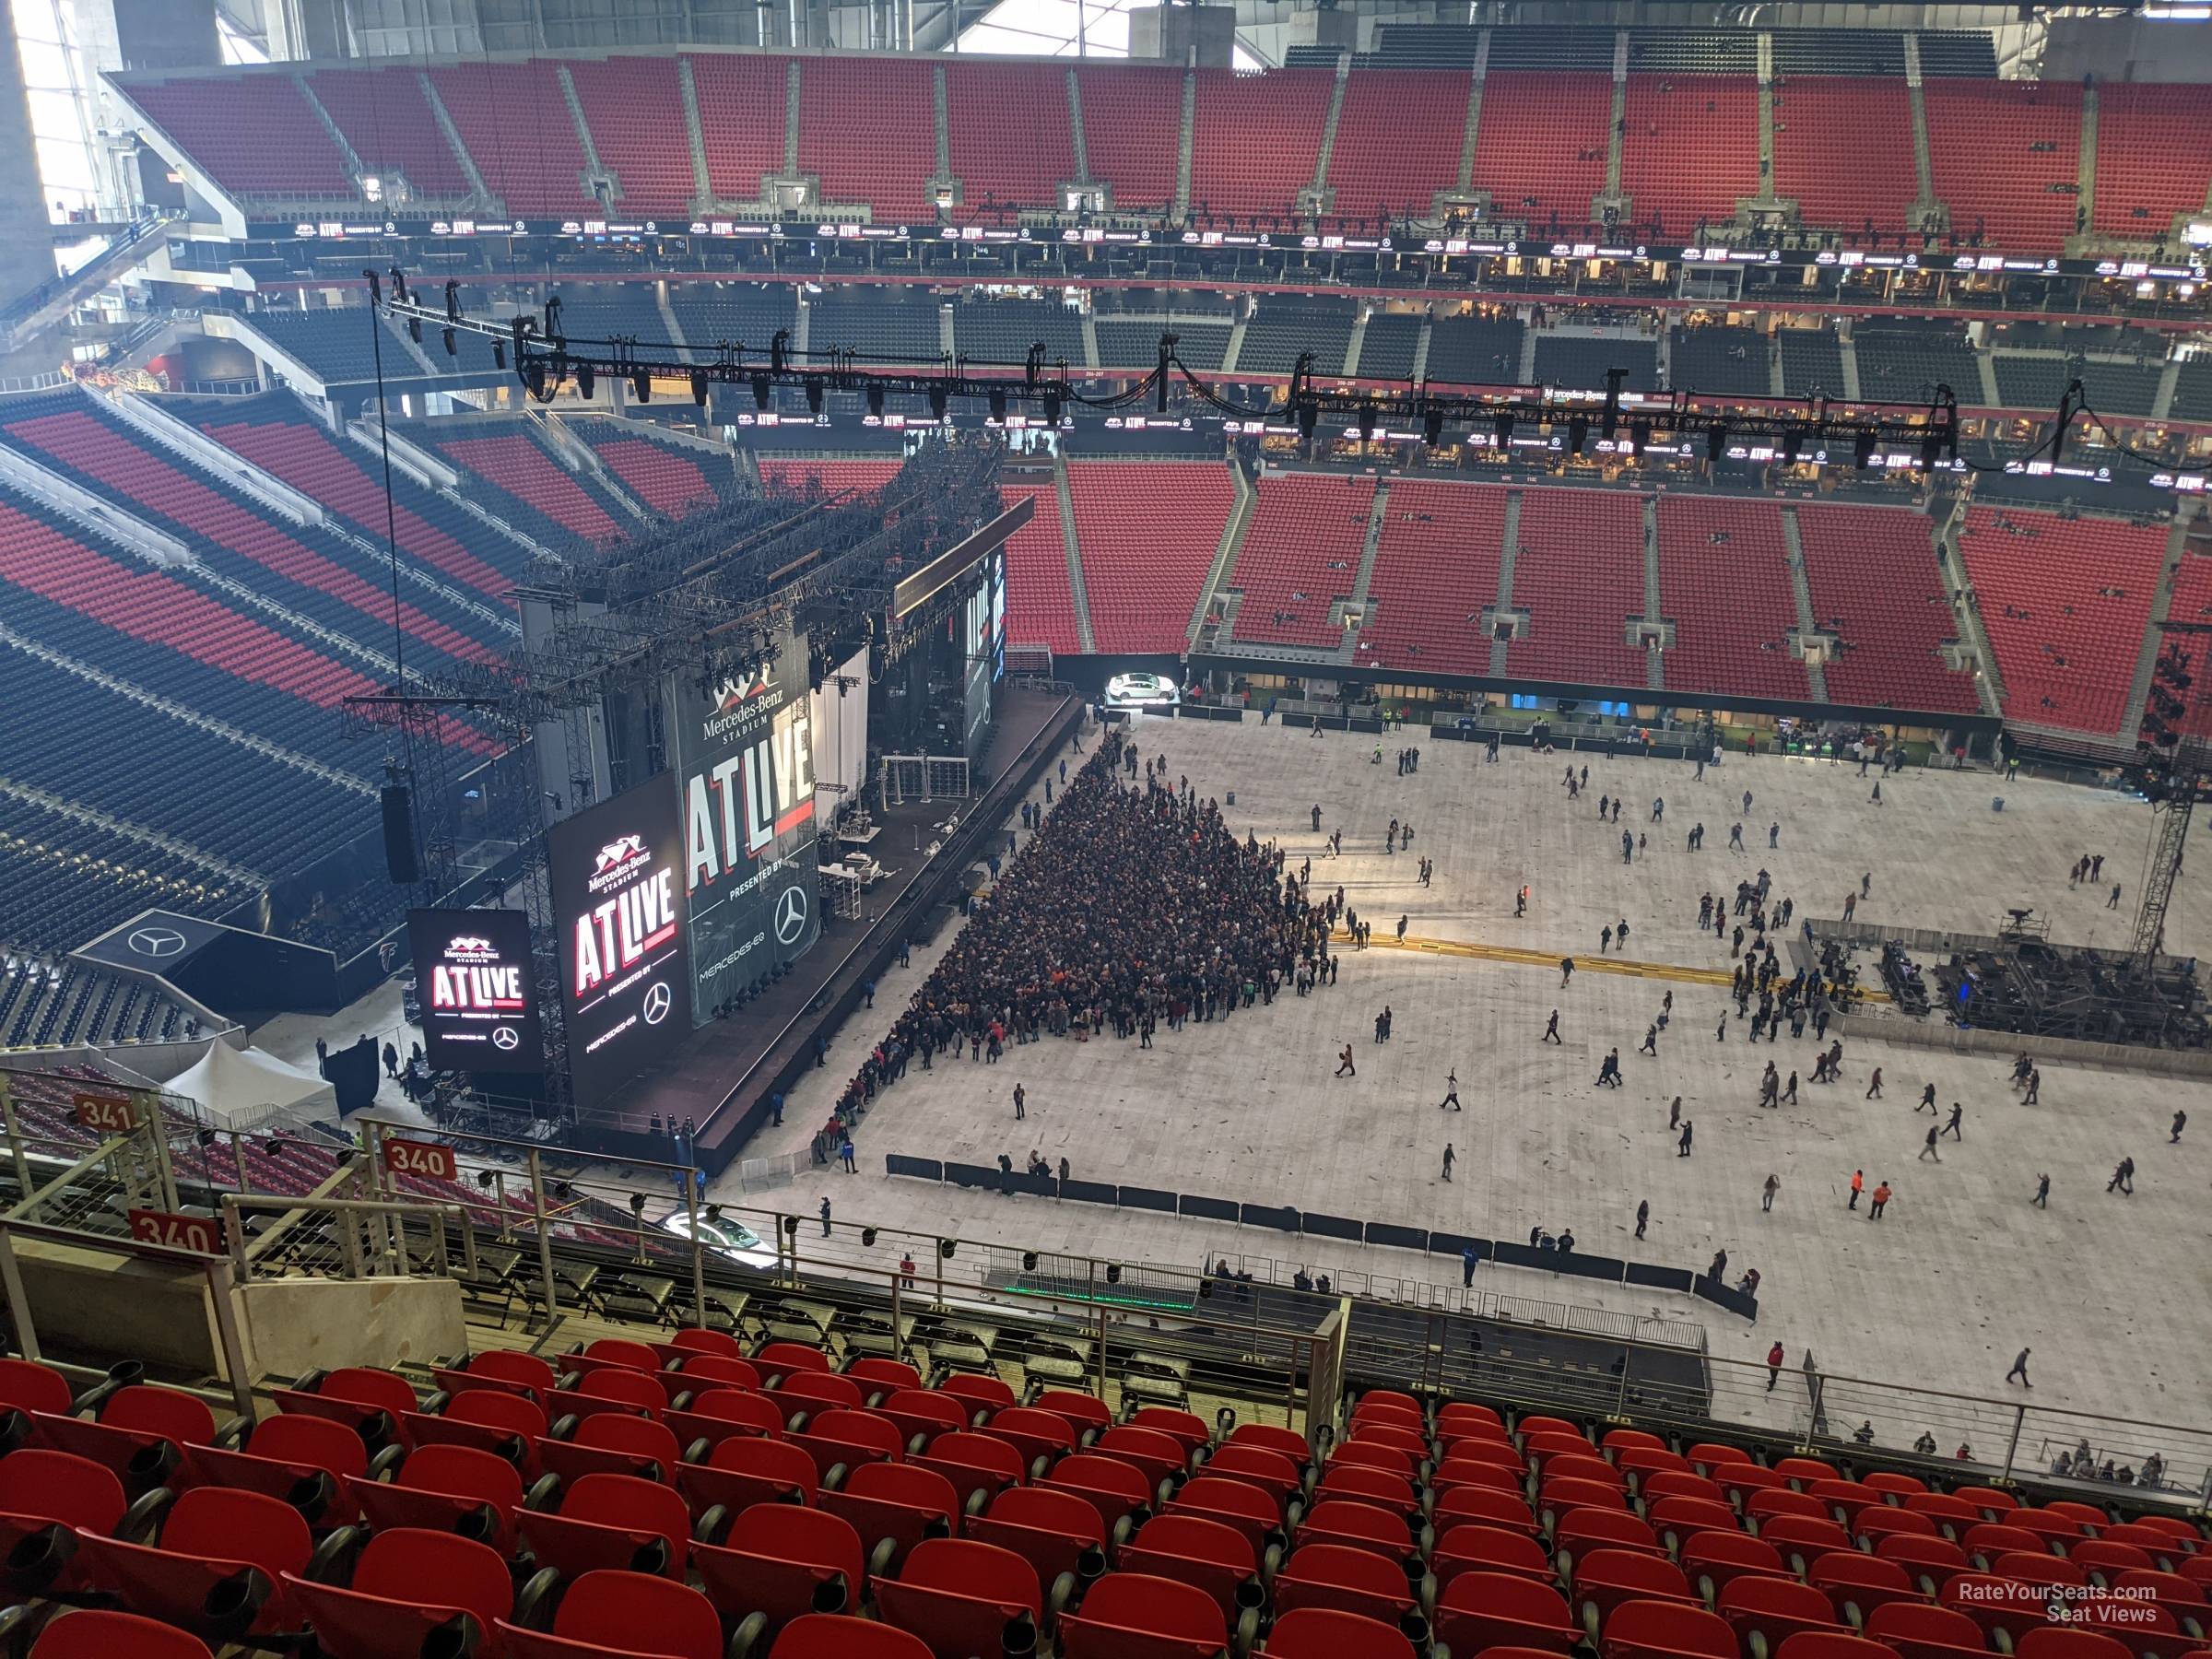 section 340, row 13 seat view  for concert - mercedes-benz stadium